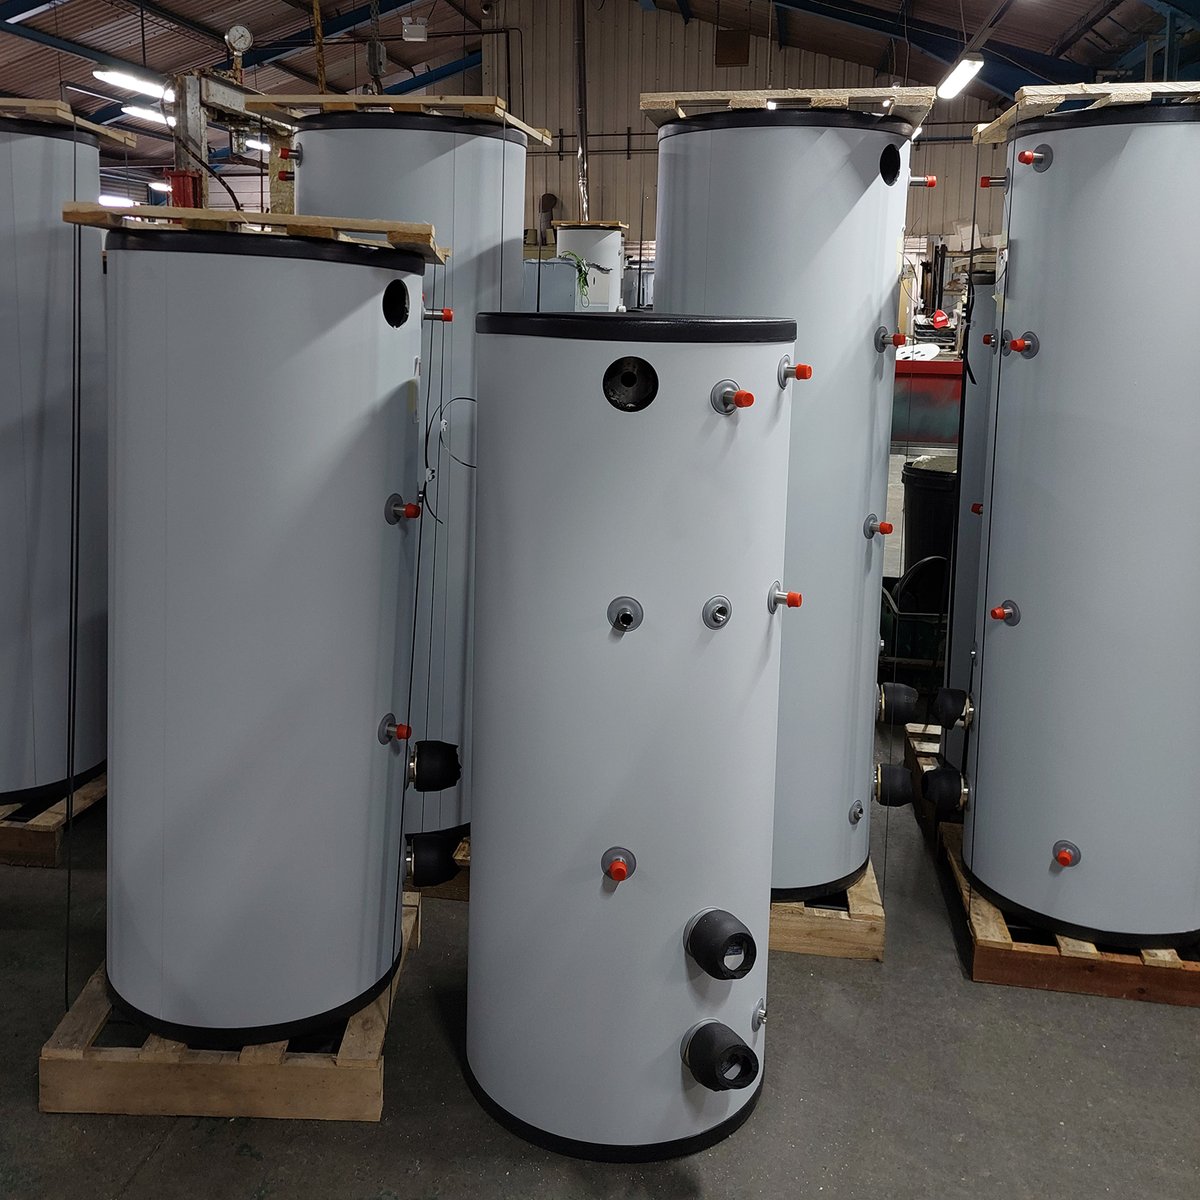 Another batch of quality water heaters is reaching the end of the line!

We have been quality water heater manufacturers since 1985. 

#manufacturemonday #manufacturer #fabdec #excelsior #excelsiorwaterheating #waterheater #waterheaters #waterheating #hvac #ukmanufacturing #ukmfg